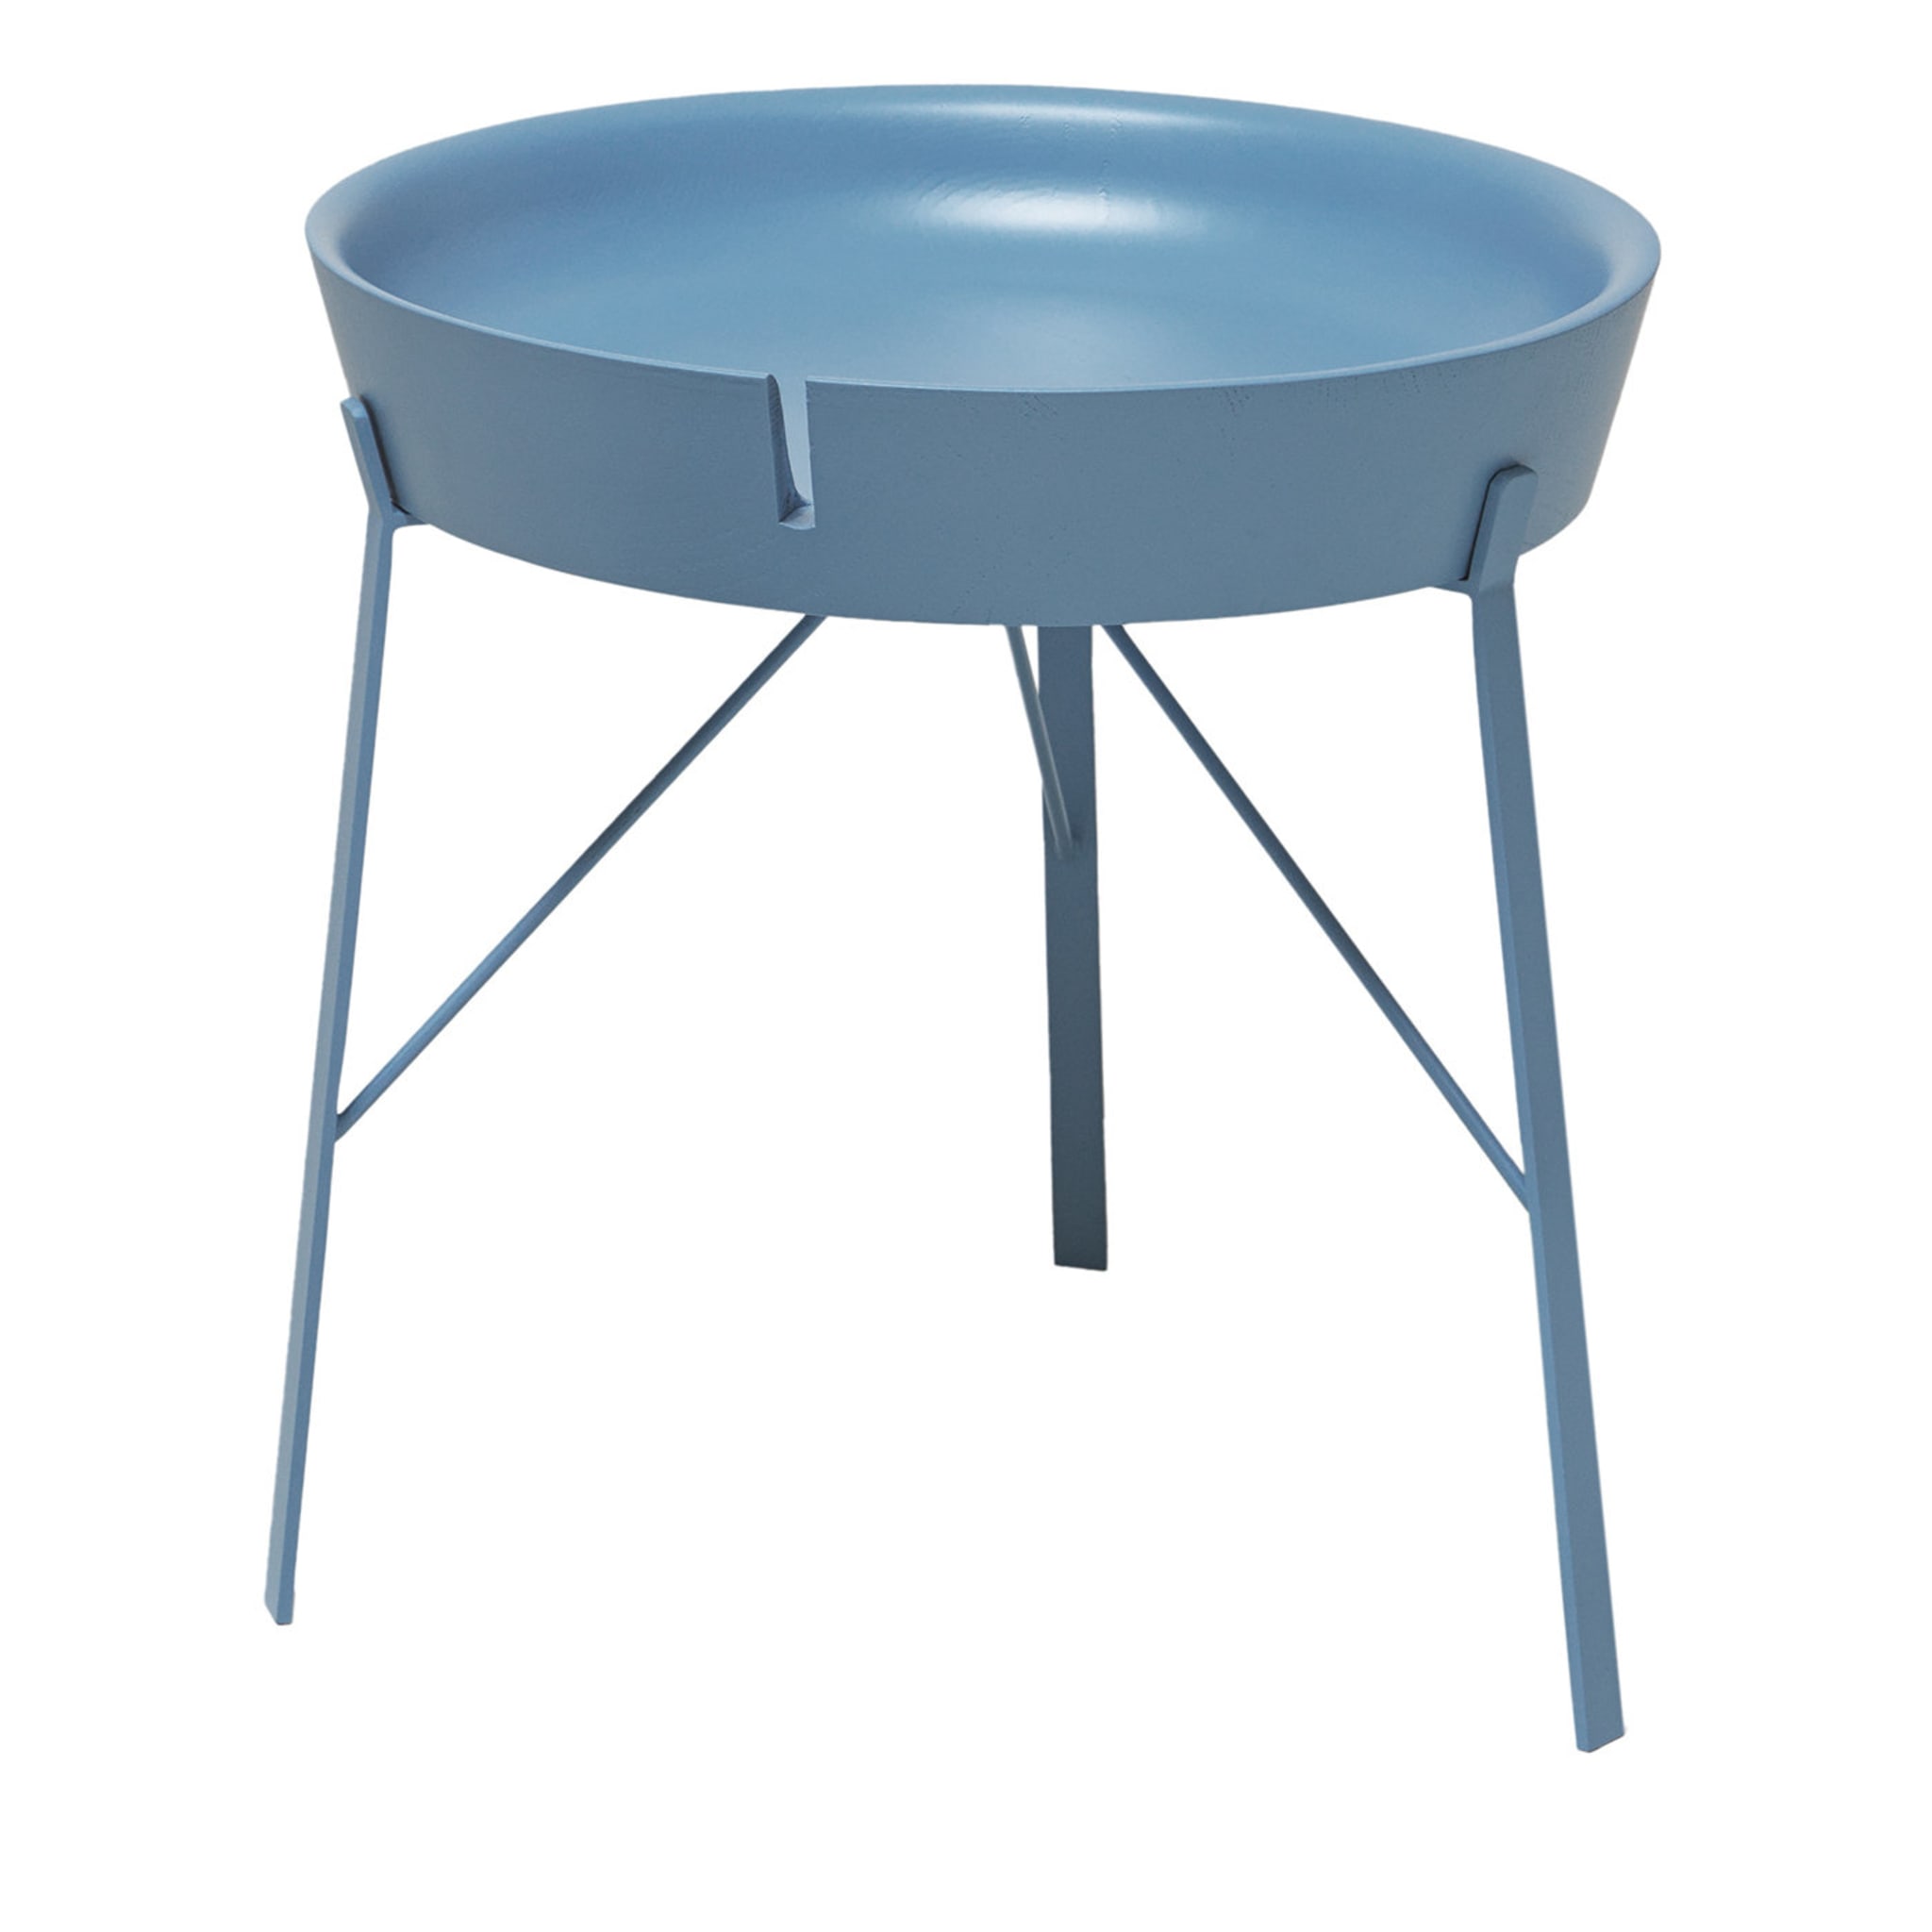 Cocoon Round Light-Blue Coffee Table by Angeletti Ruzza - Main view